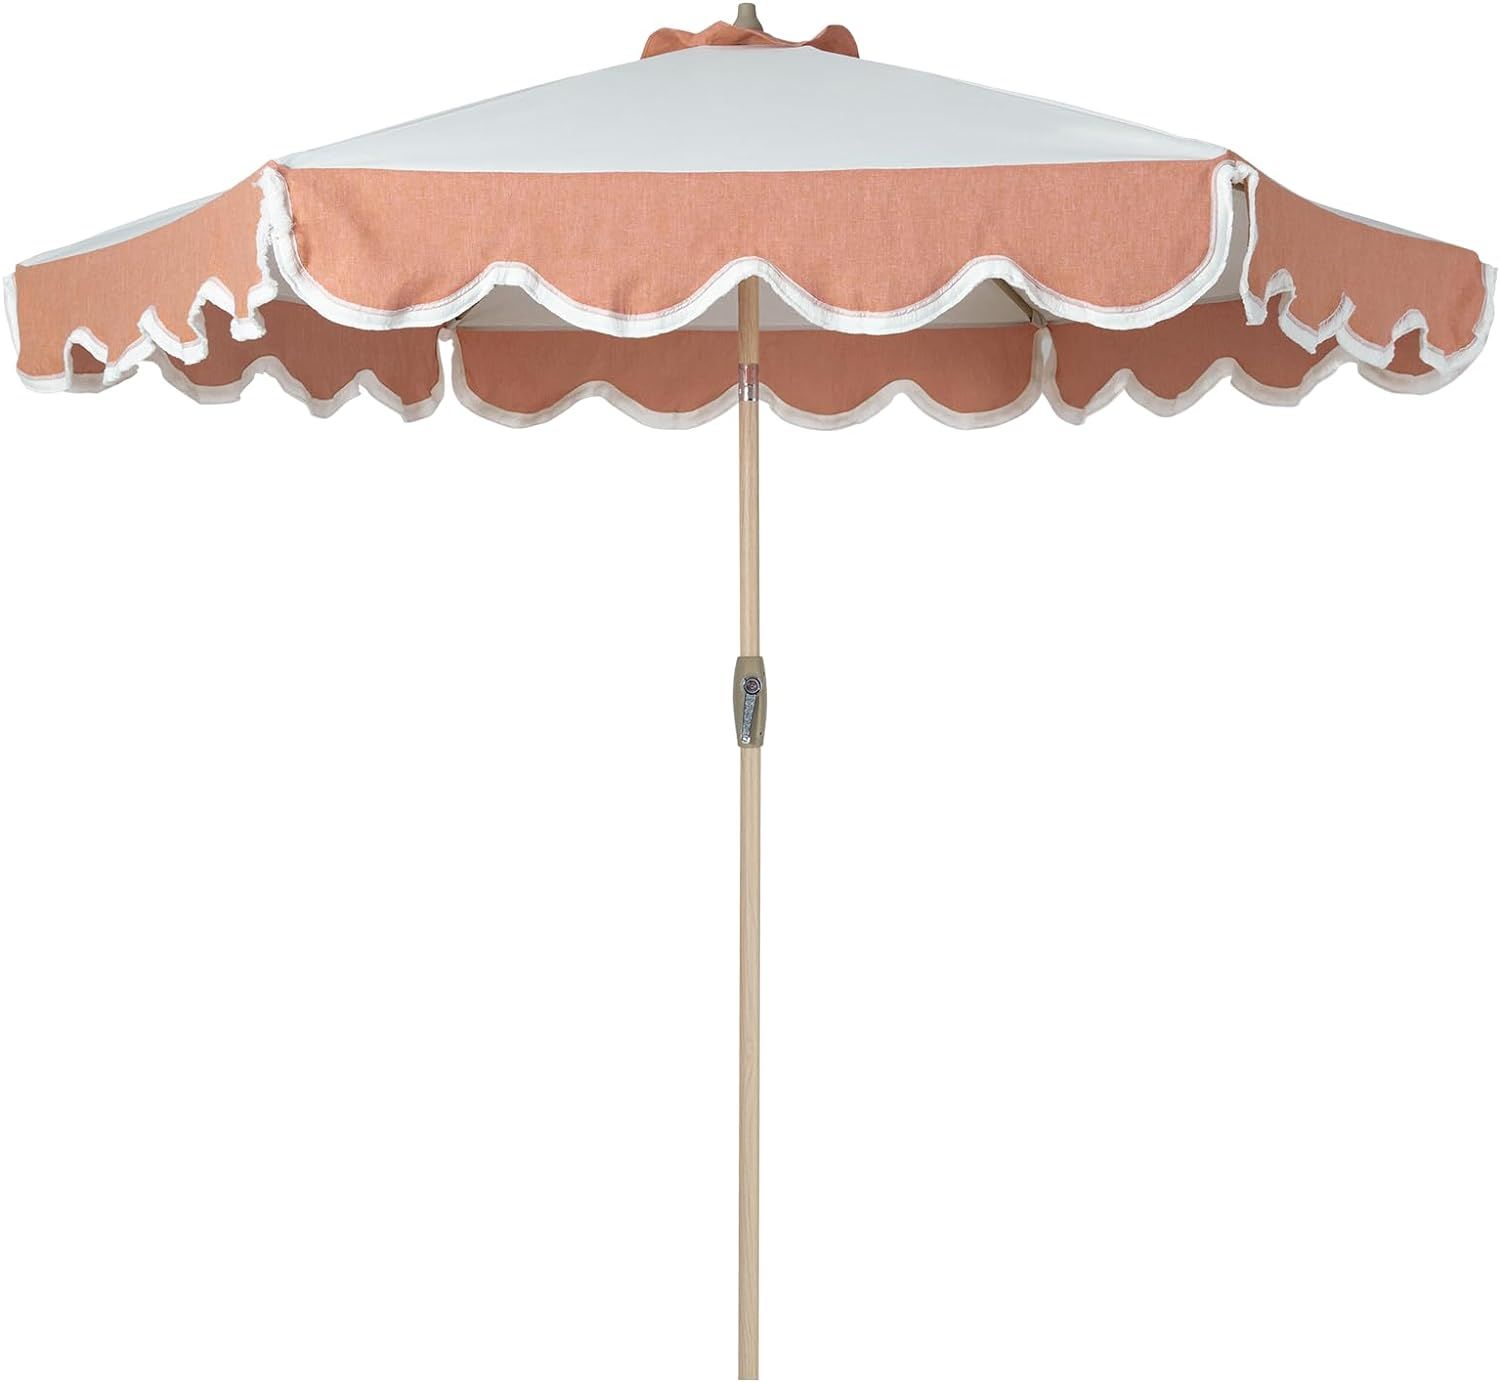 Tempera 9ft Scalloped Patio Umbrellas with Fringe, Market Umbrellas with Water-Resistant and Fade... | Amazon (US)